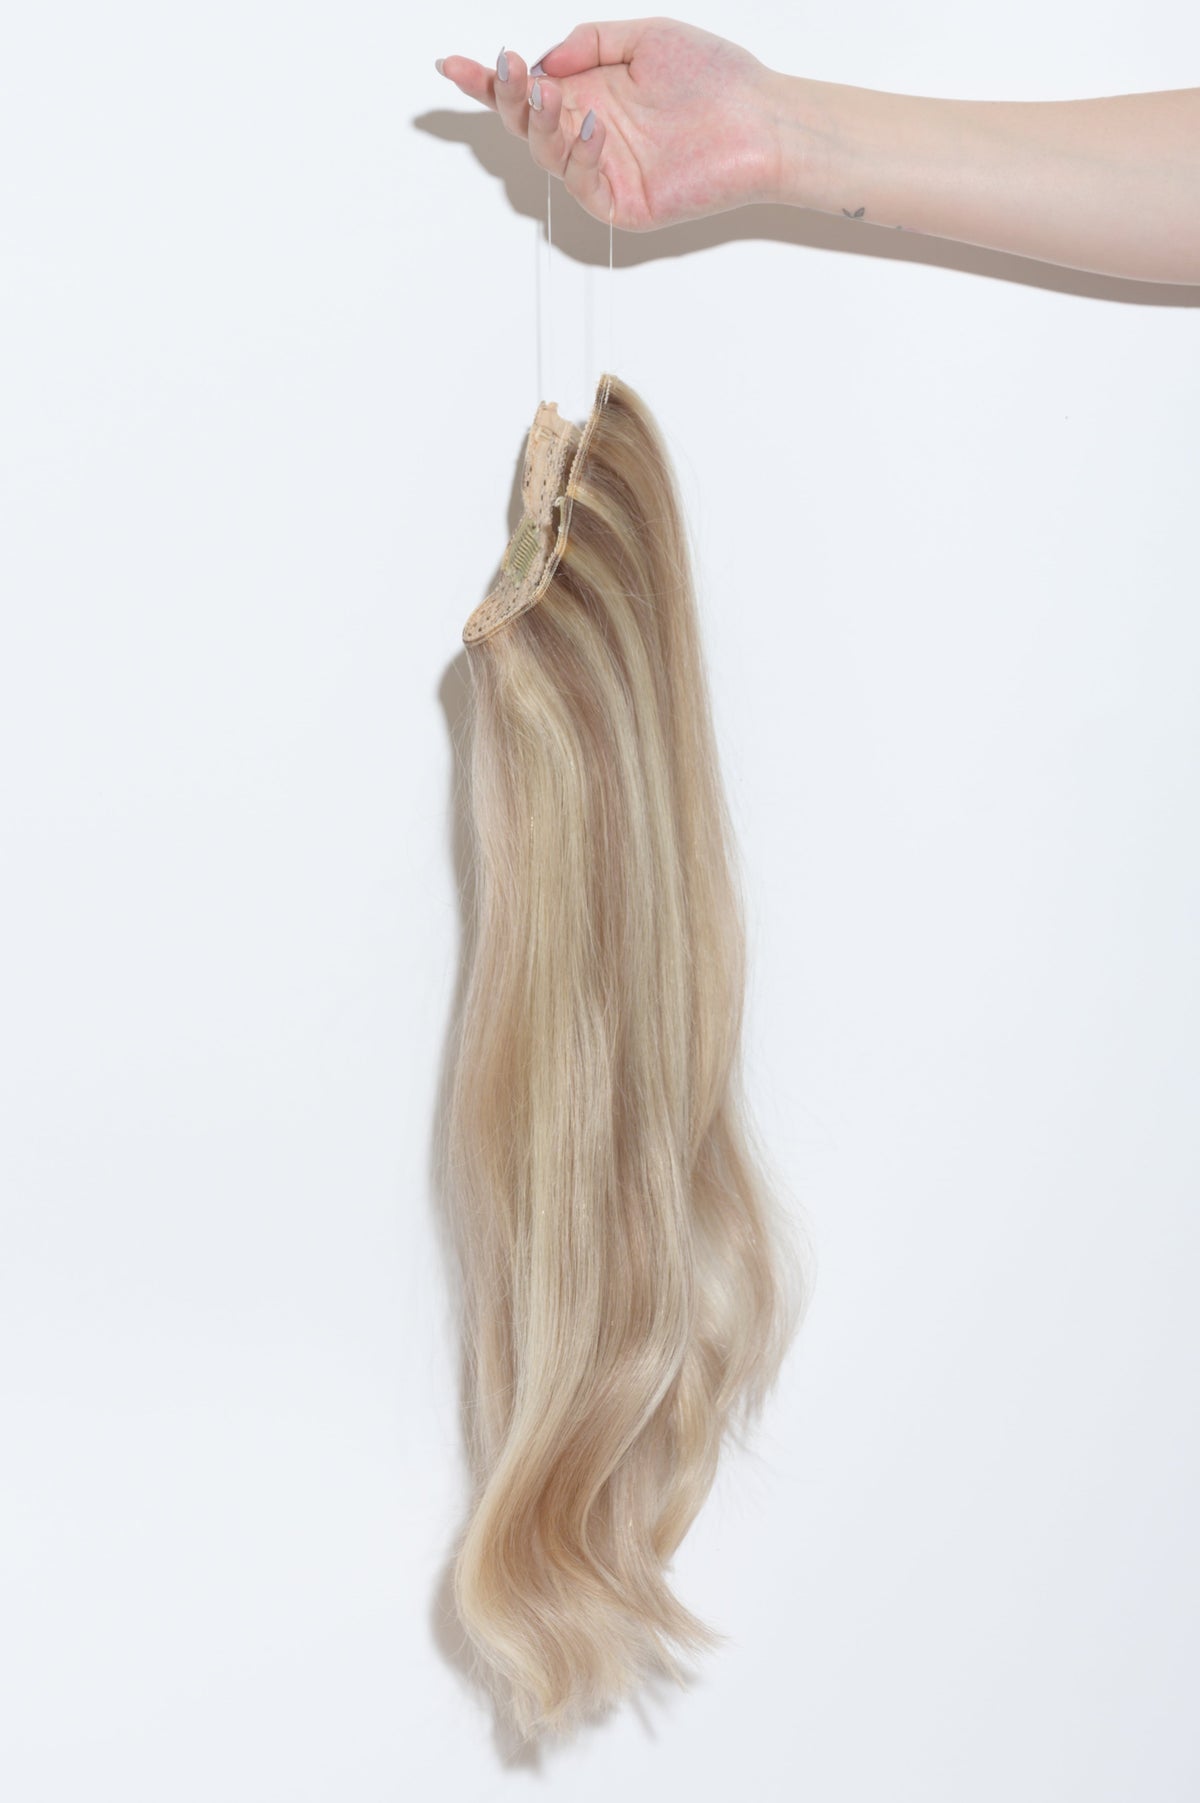 #18/613 Ash Blonde Highlights Classic Halo Hair Extensions